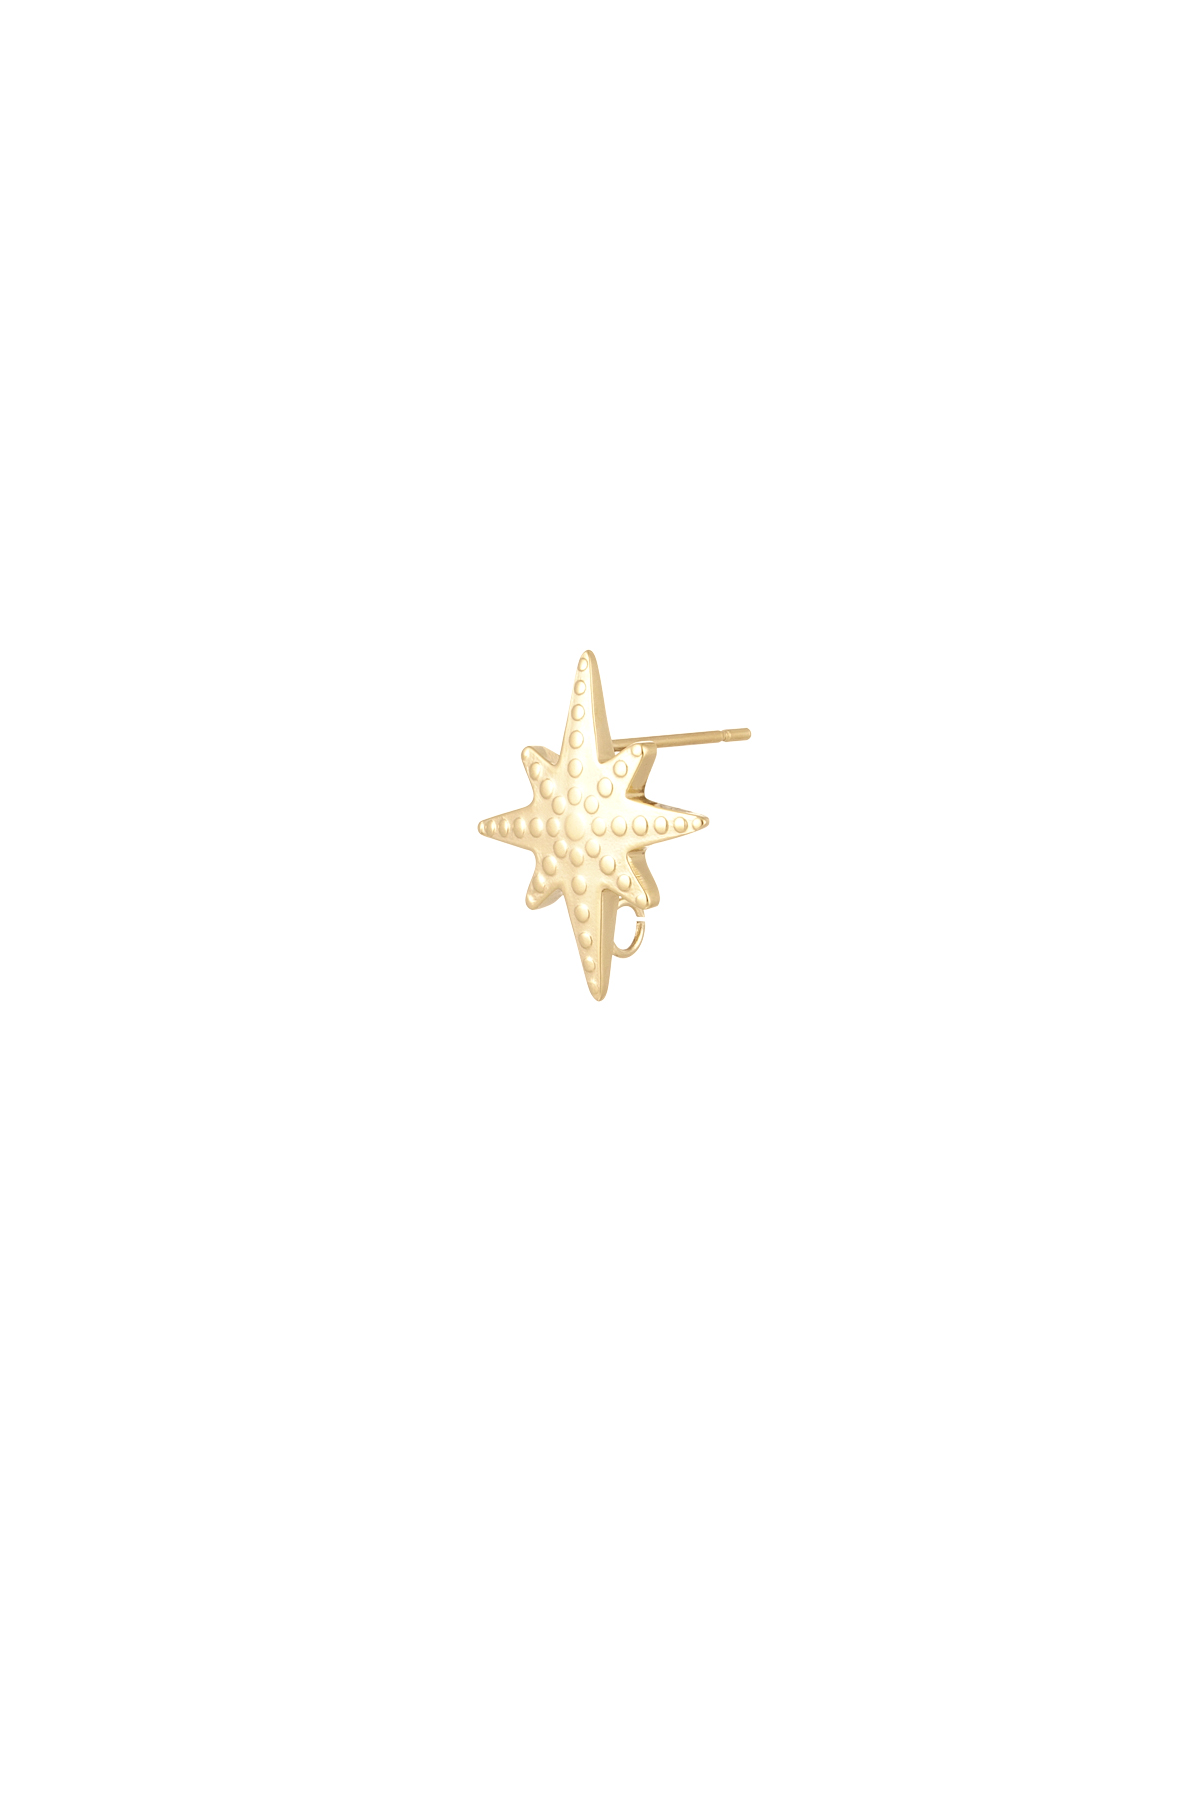 Ear stud part star - gold Stainless Steel